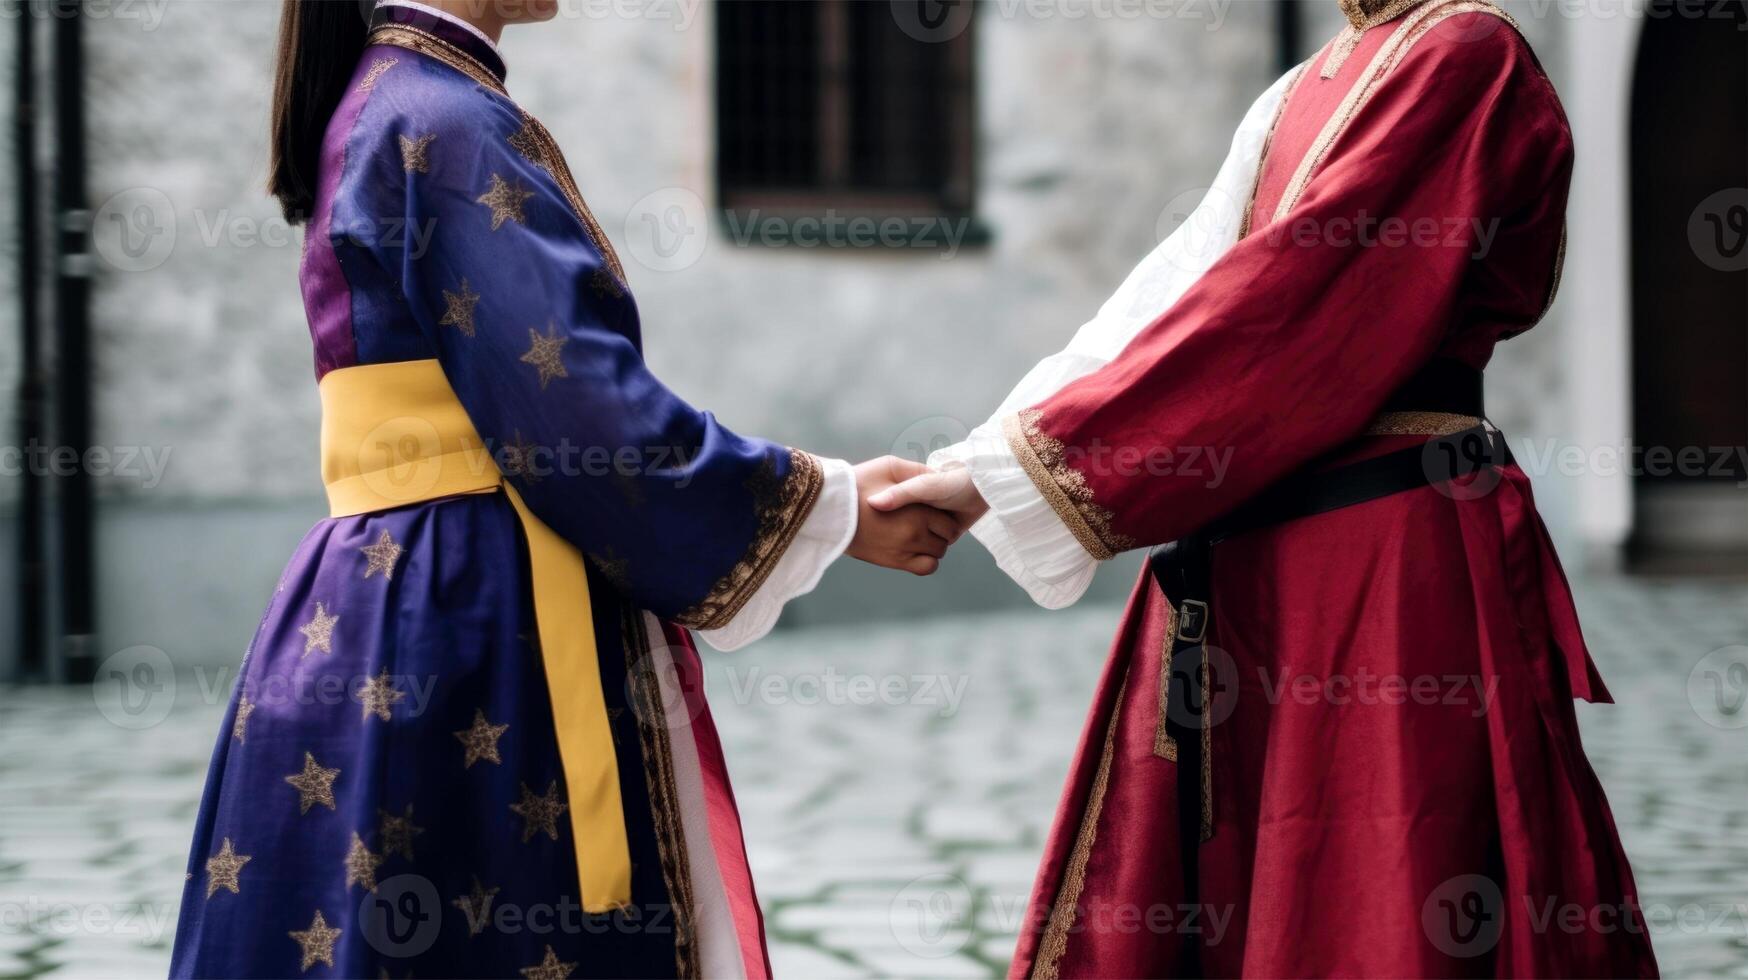 Cropped Image of Friendly or Casual Handshake Between Asian Women in their Traditional Attires. . photo